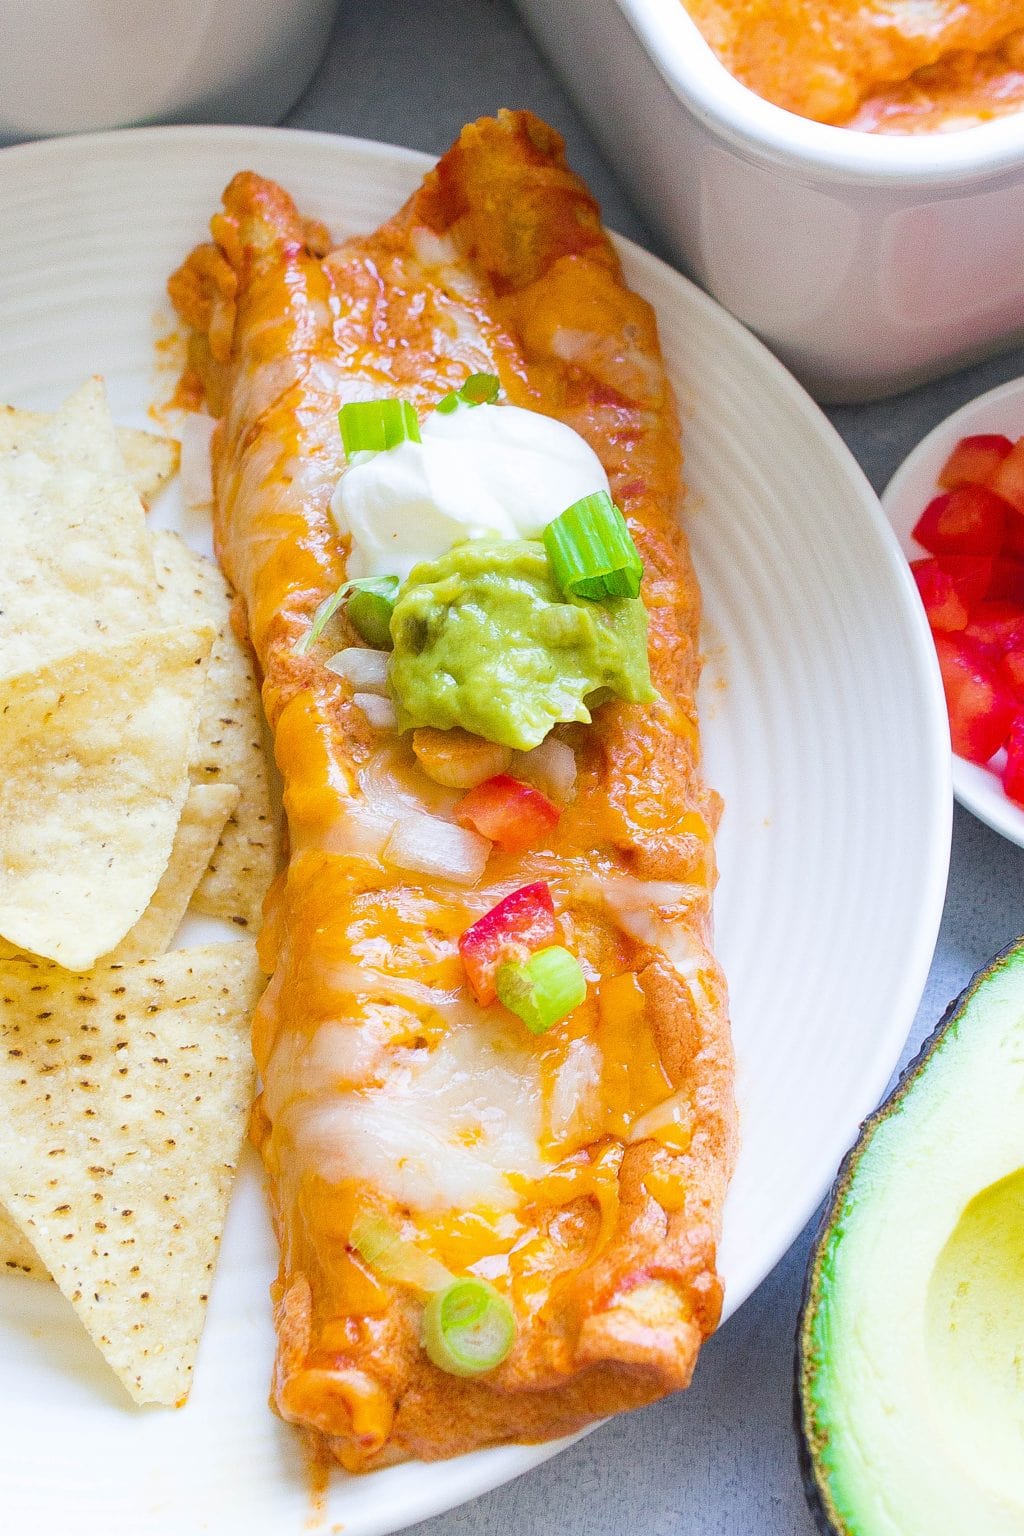 THE BEST Cheese Enchilada Recipe (Easy & Made In 30 Minutes)